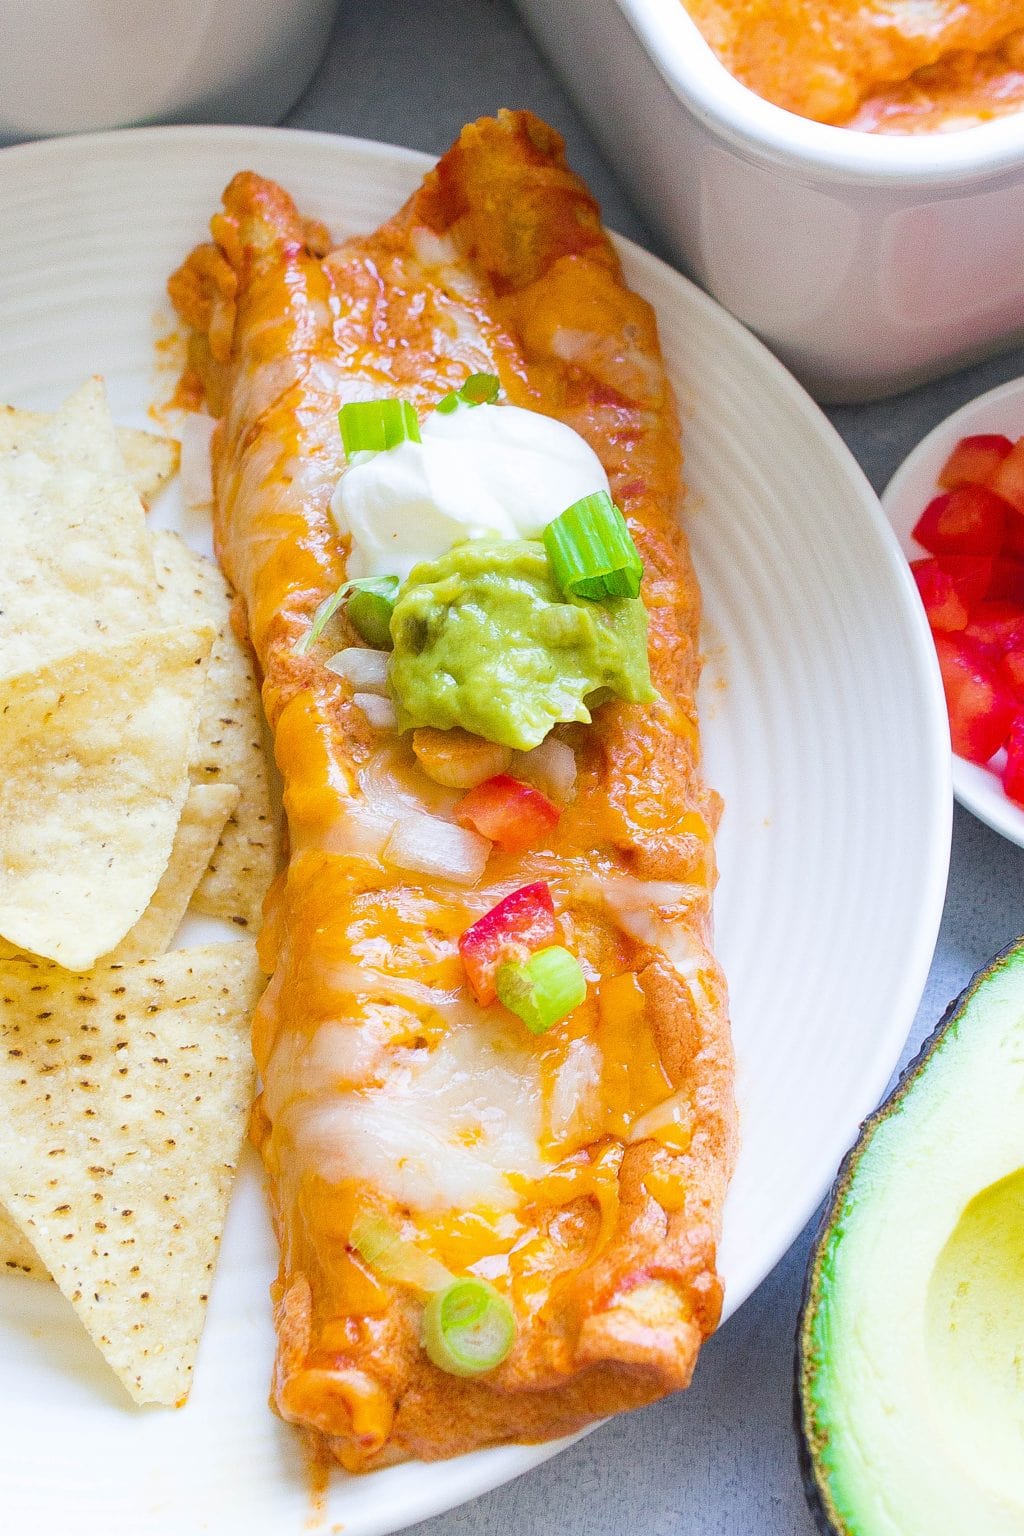 THE BEST Cheese Enchilada Recipe (Easy & Made In 30 Minutes)